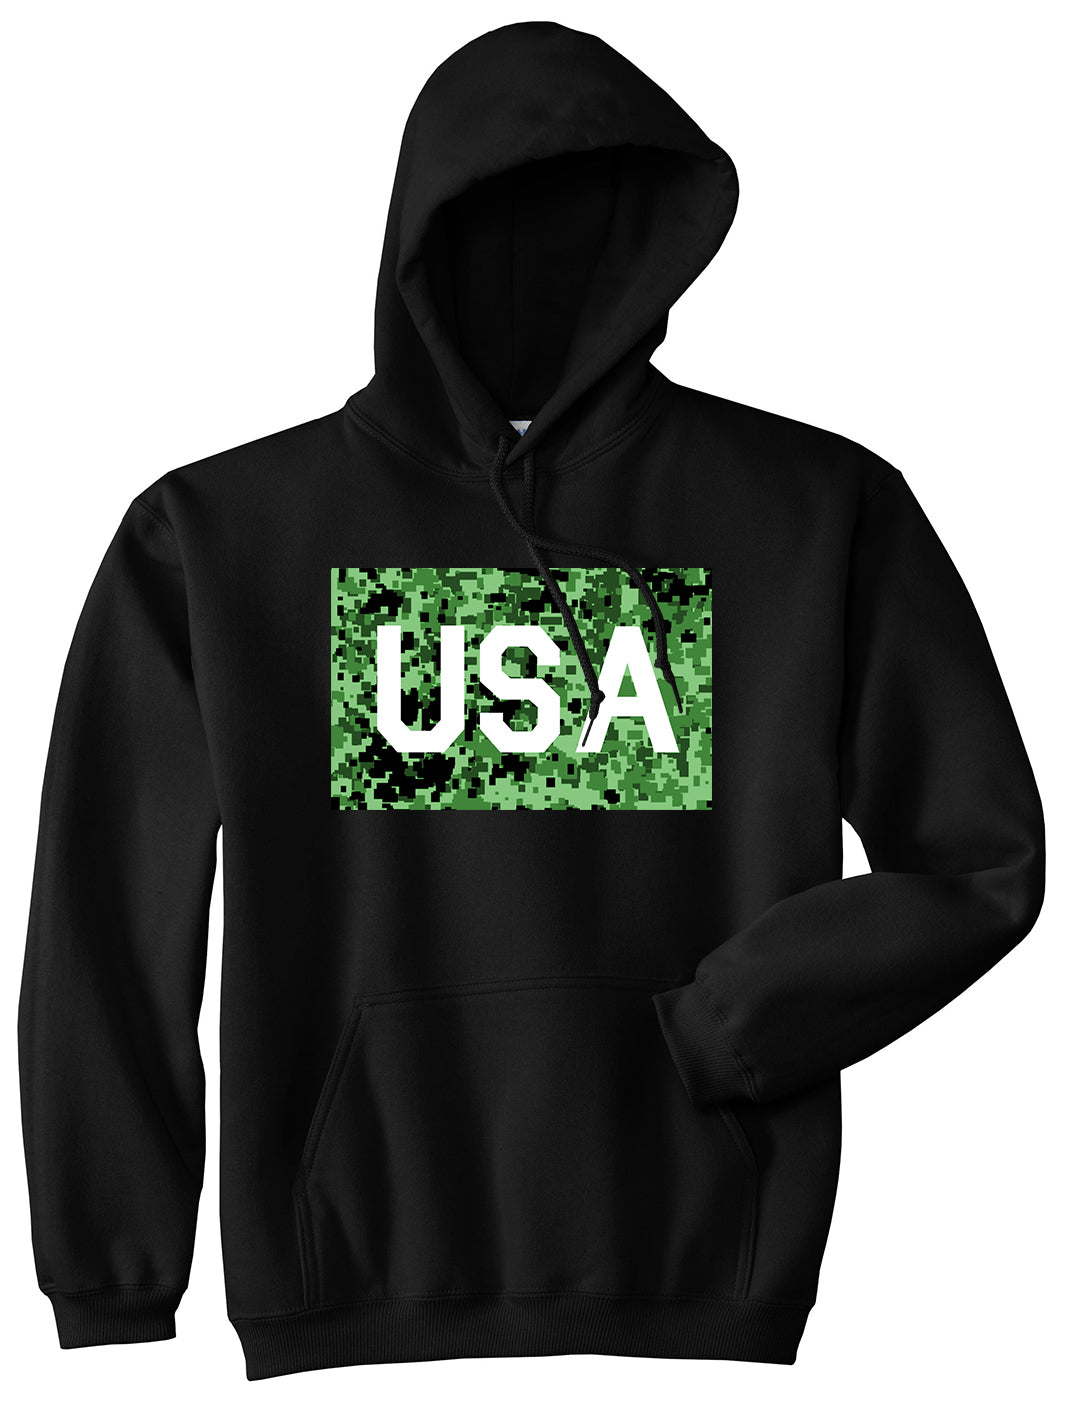 USA Digital Camo Army Mens Black Pullover Hoodie by Kings Of NY